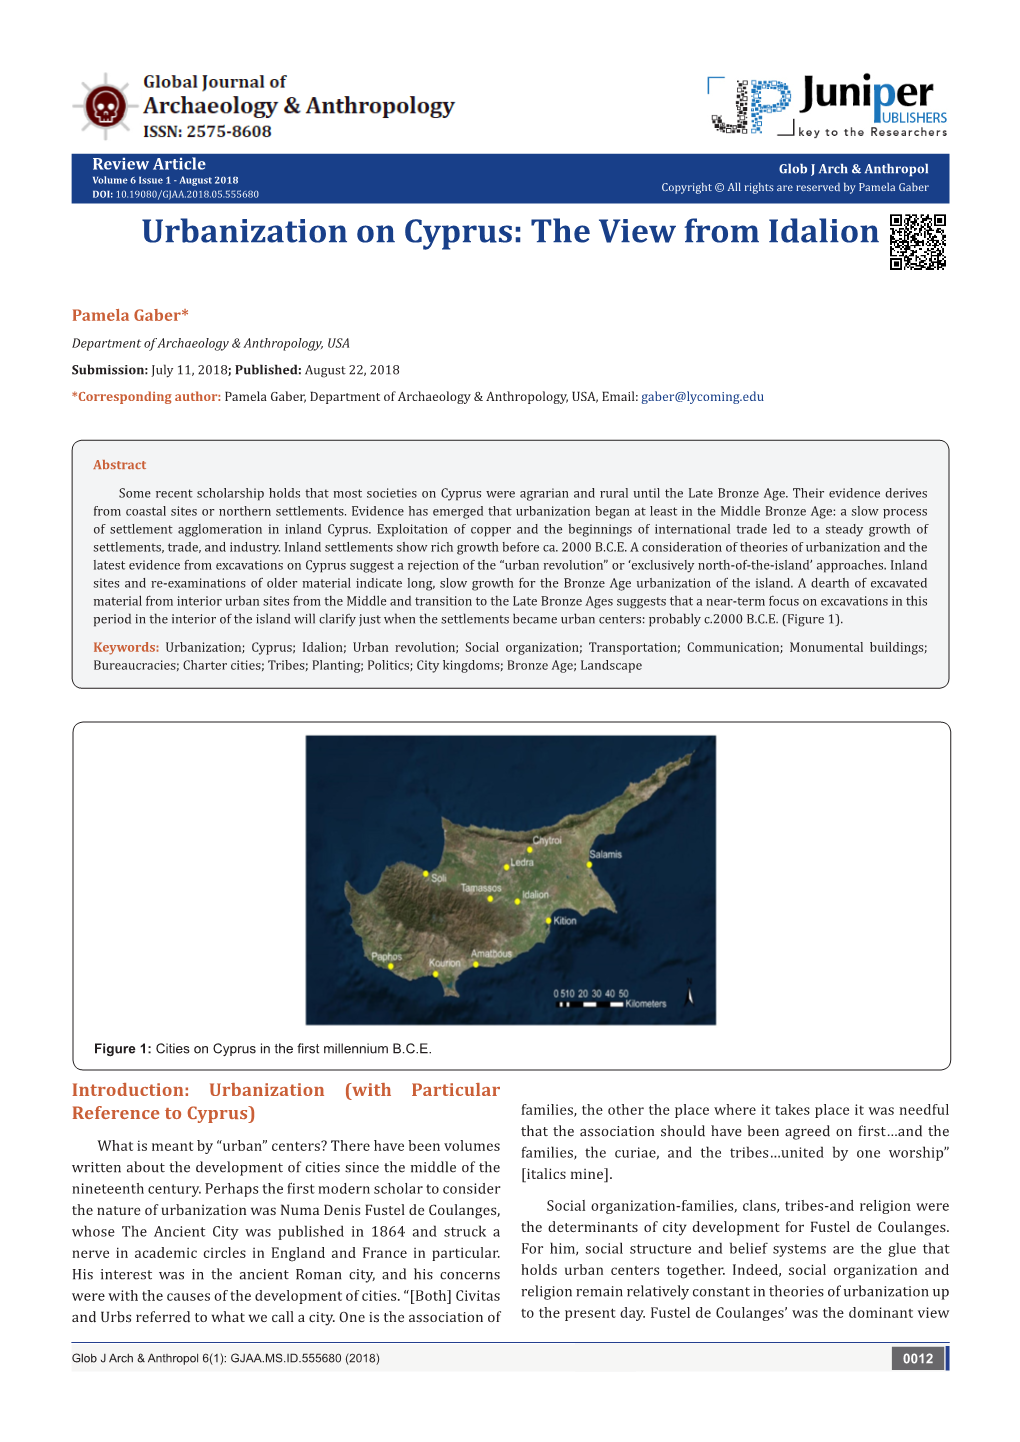 Urbanization on Cyprus: the View from Idalion